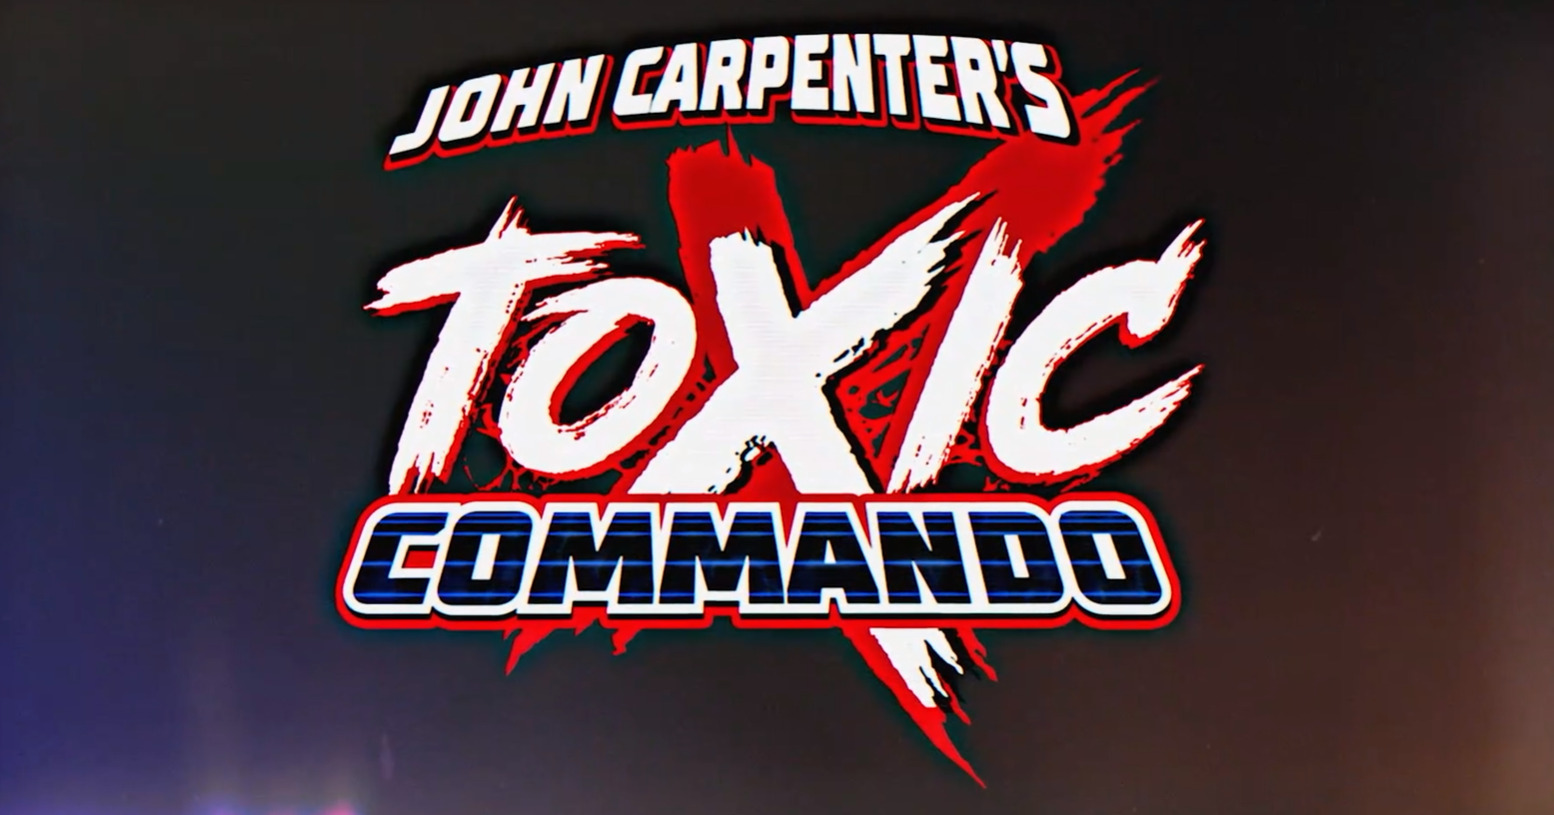 John Carpenter's Toxic Commando Is a Co-Op FPS Powered by Saber's Swarm  Engine and Due in 2024